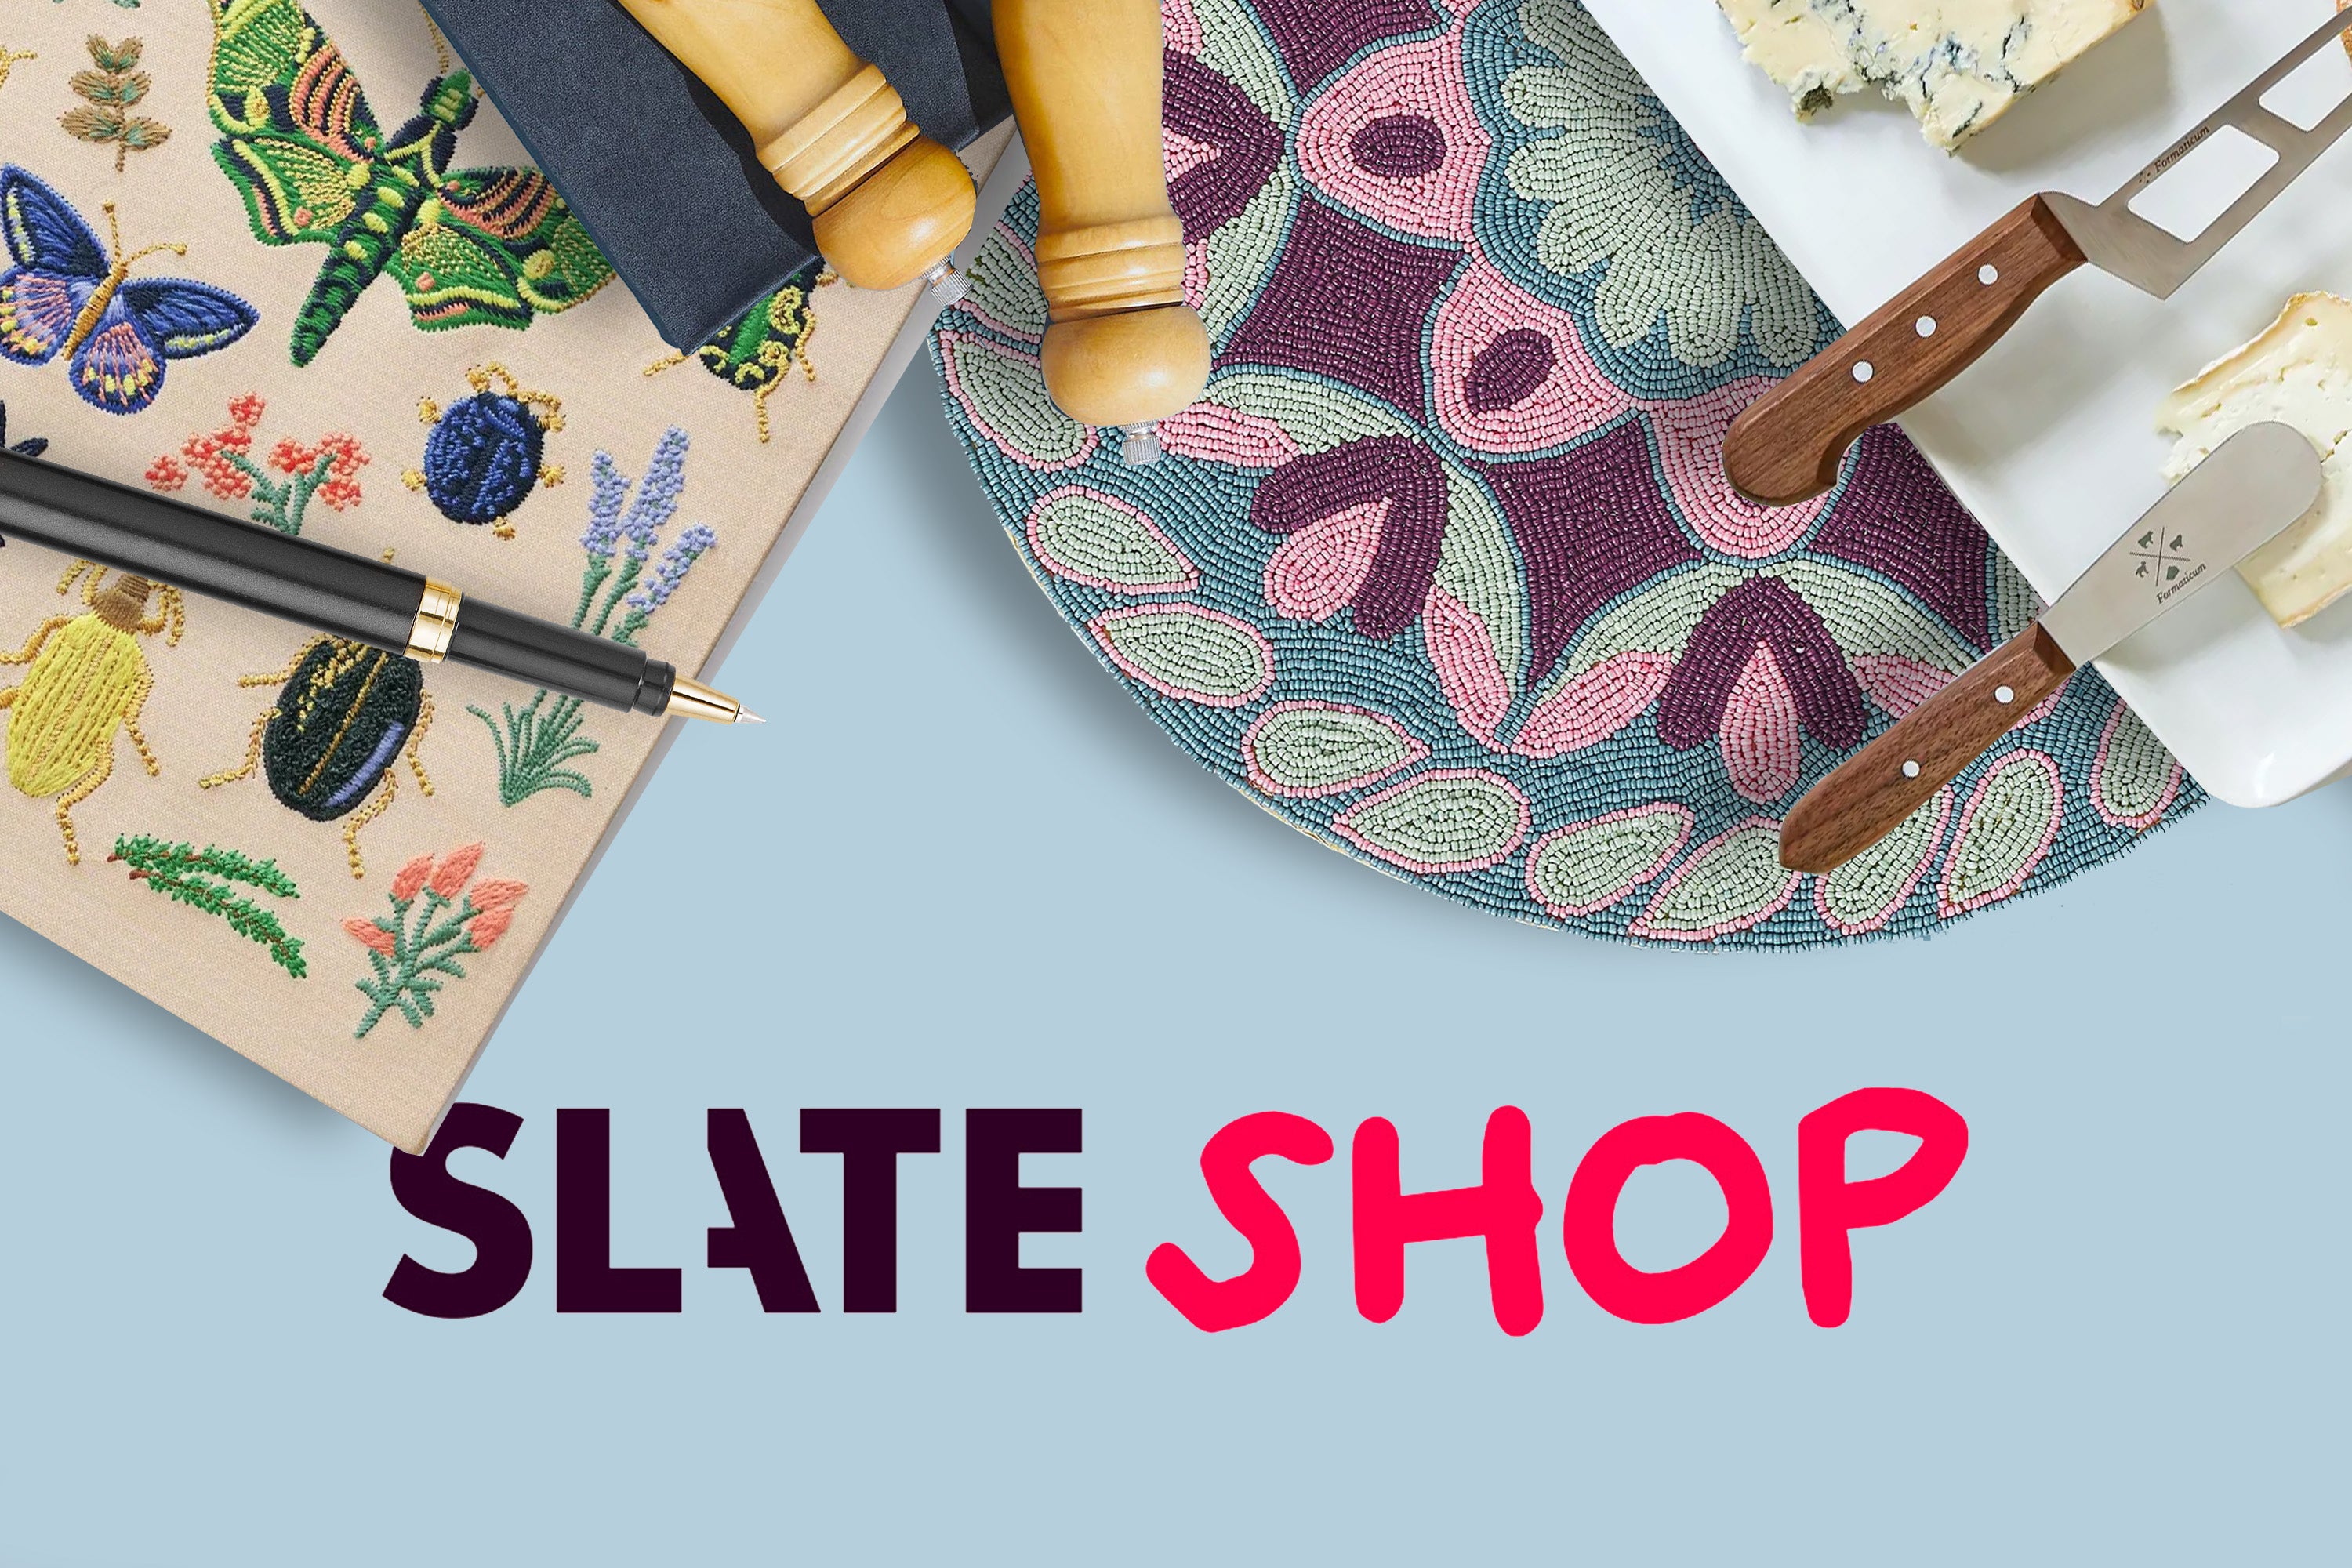 Collection of gifts and products available at the Slate Shop 